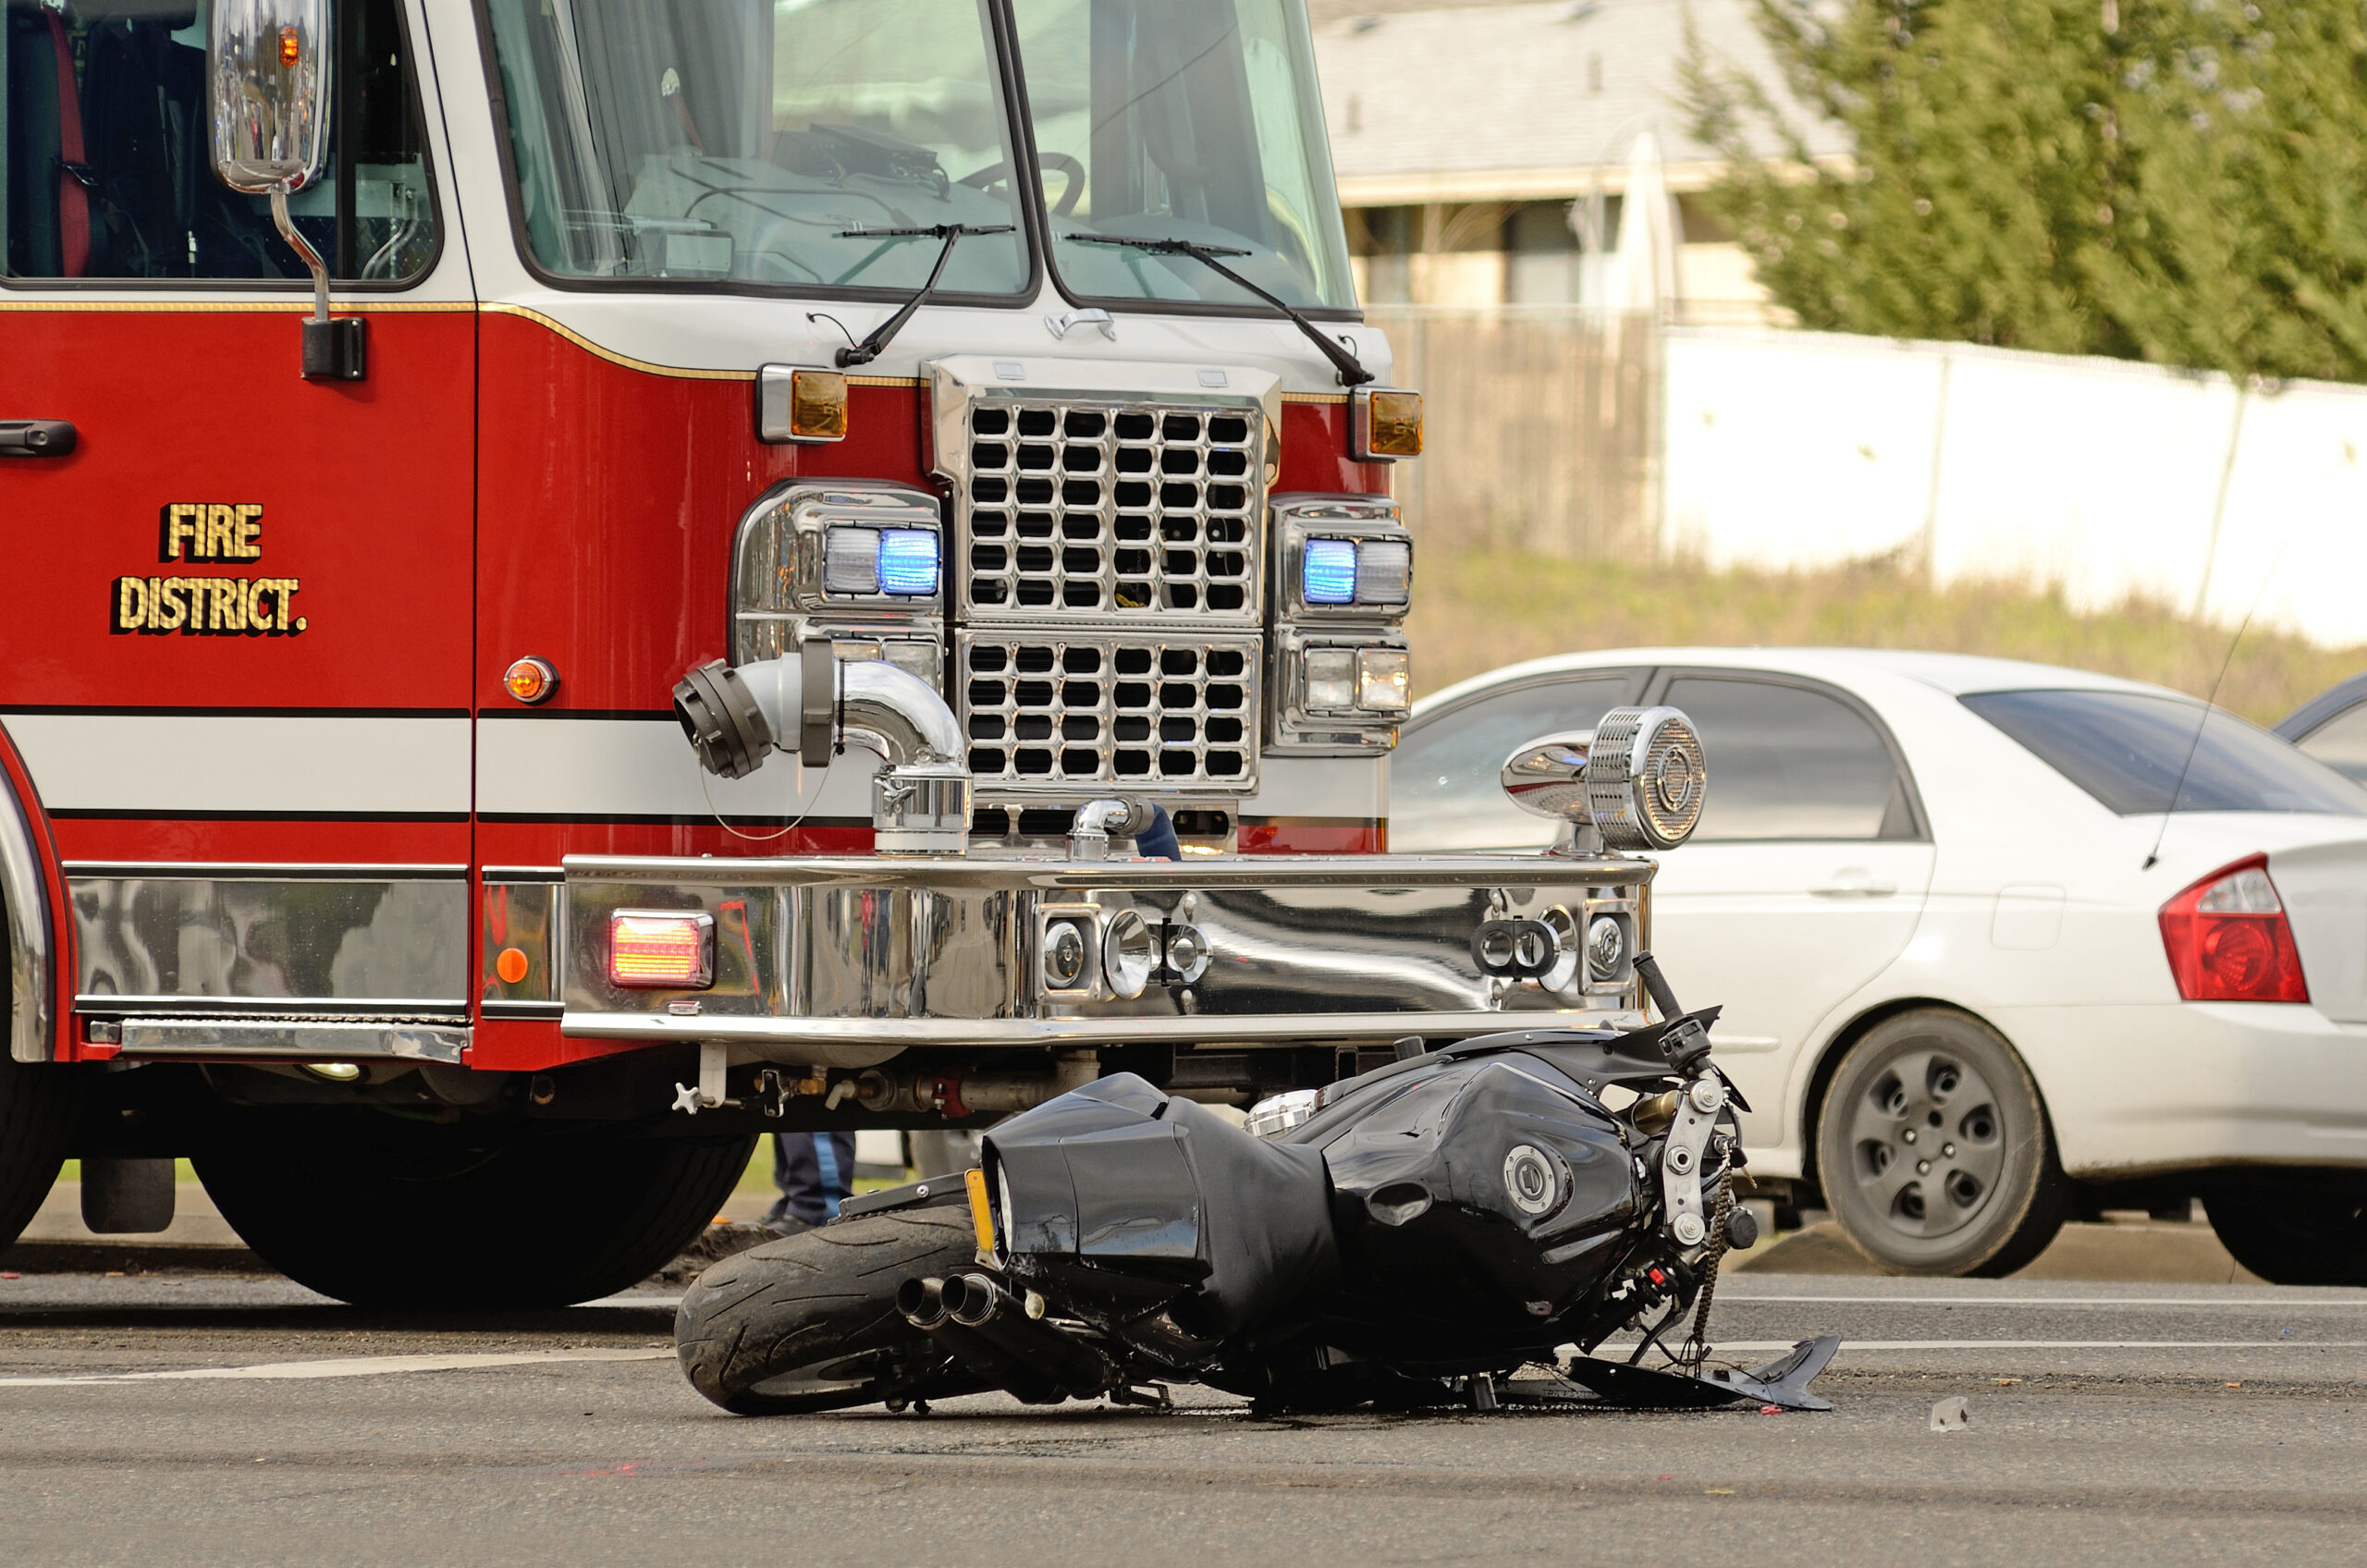 What to Do After a Motorcycle Accident in Fishers, Indiana: Step-by-Step Guide